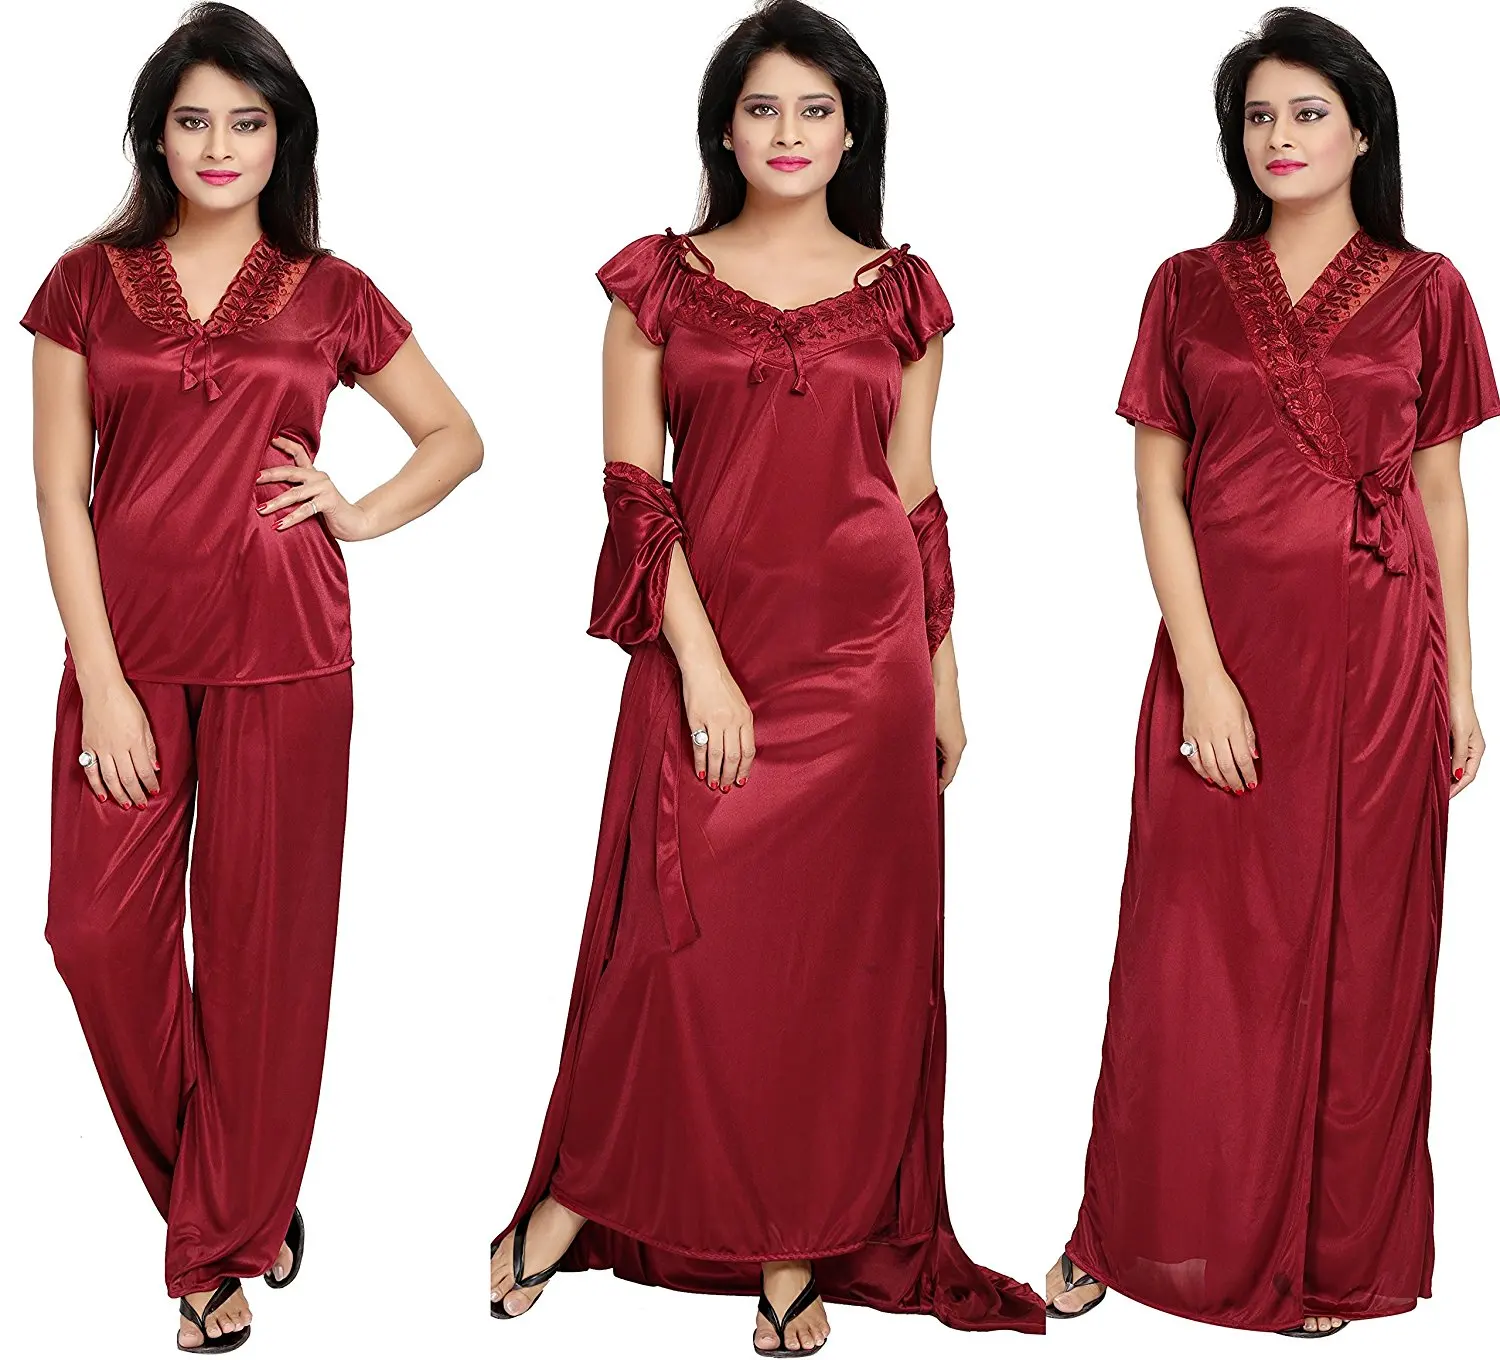 Cheap Nighty Designs For Women Find Nighty Designs For Women Deals On 